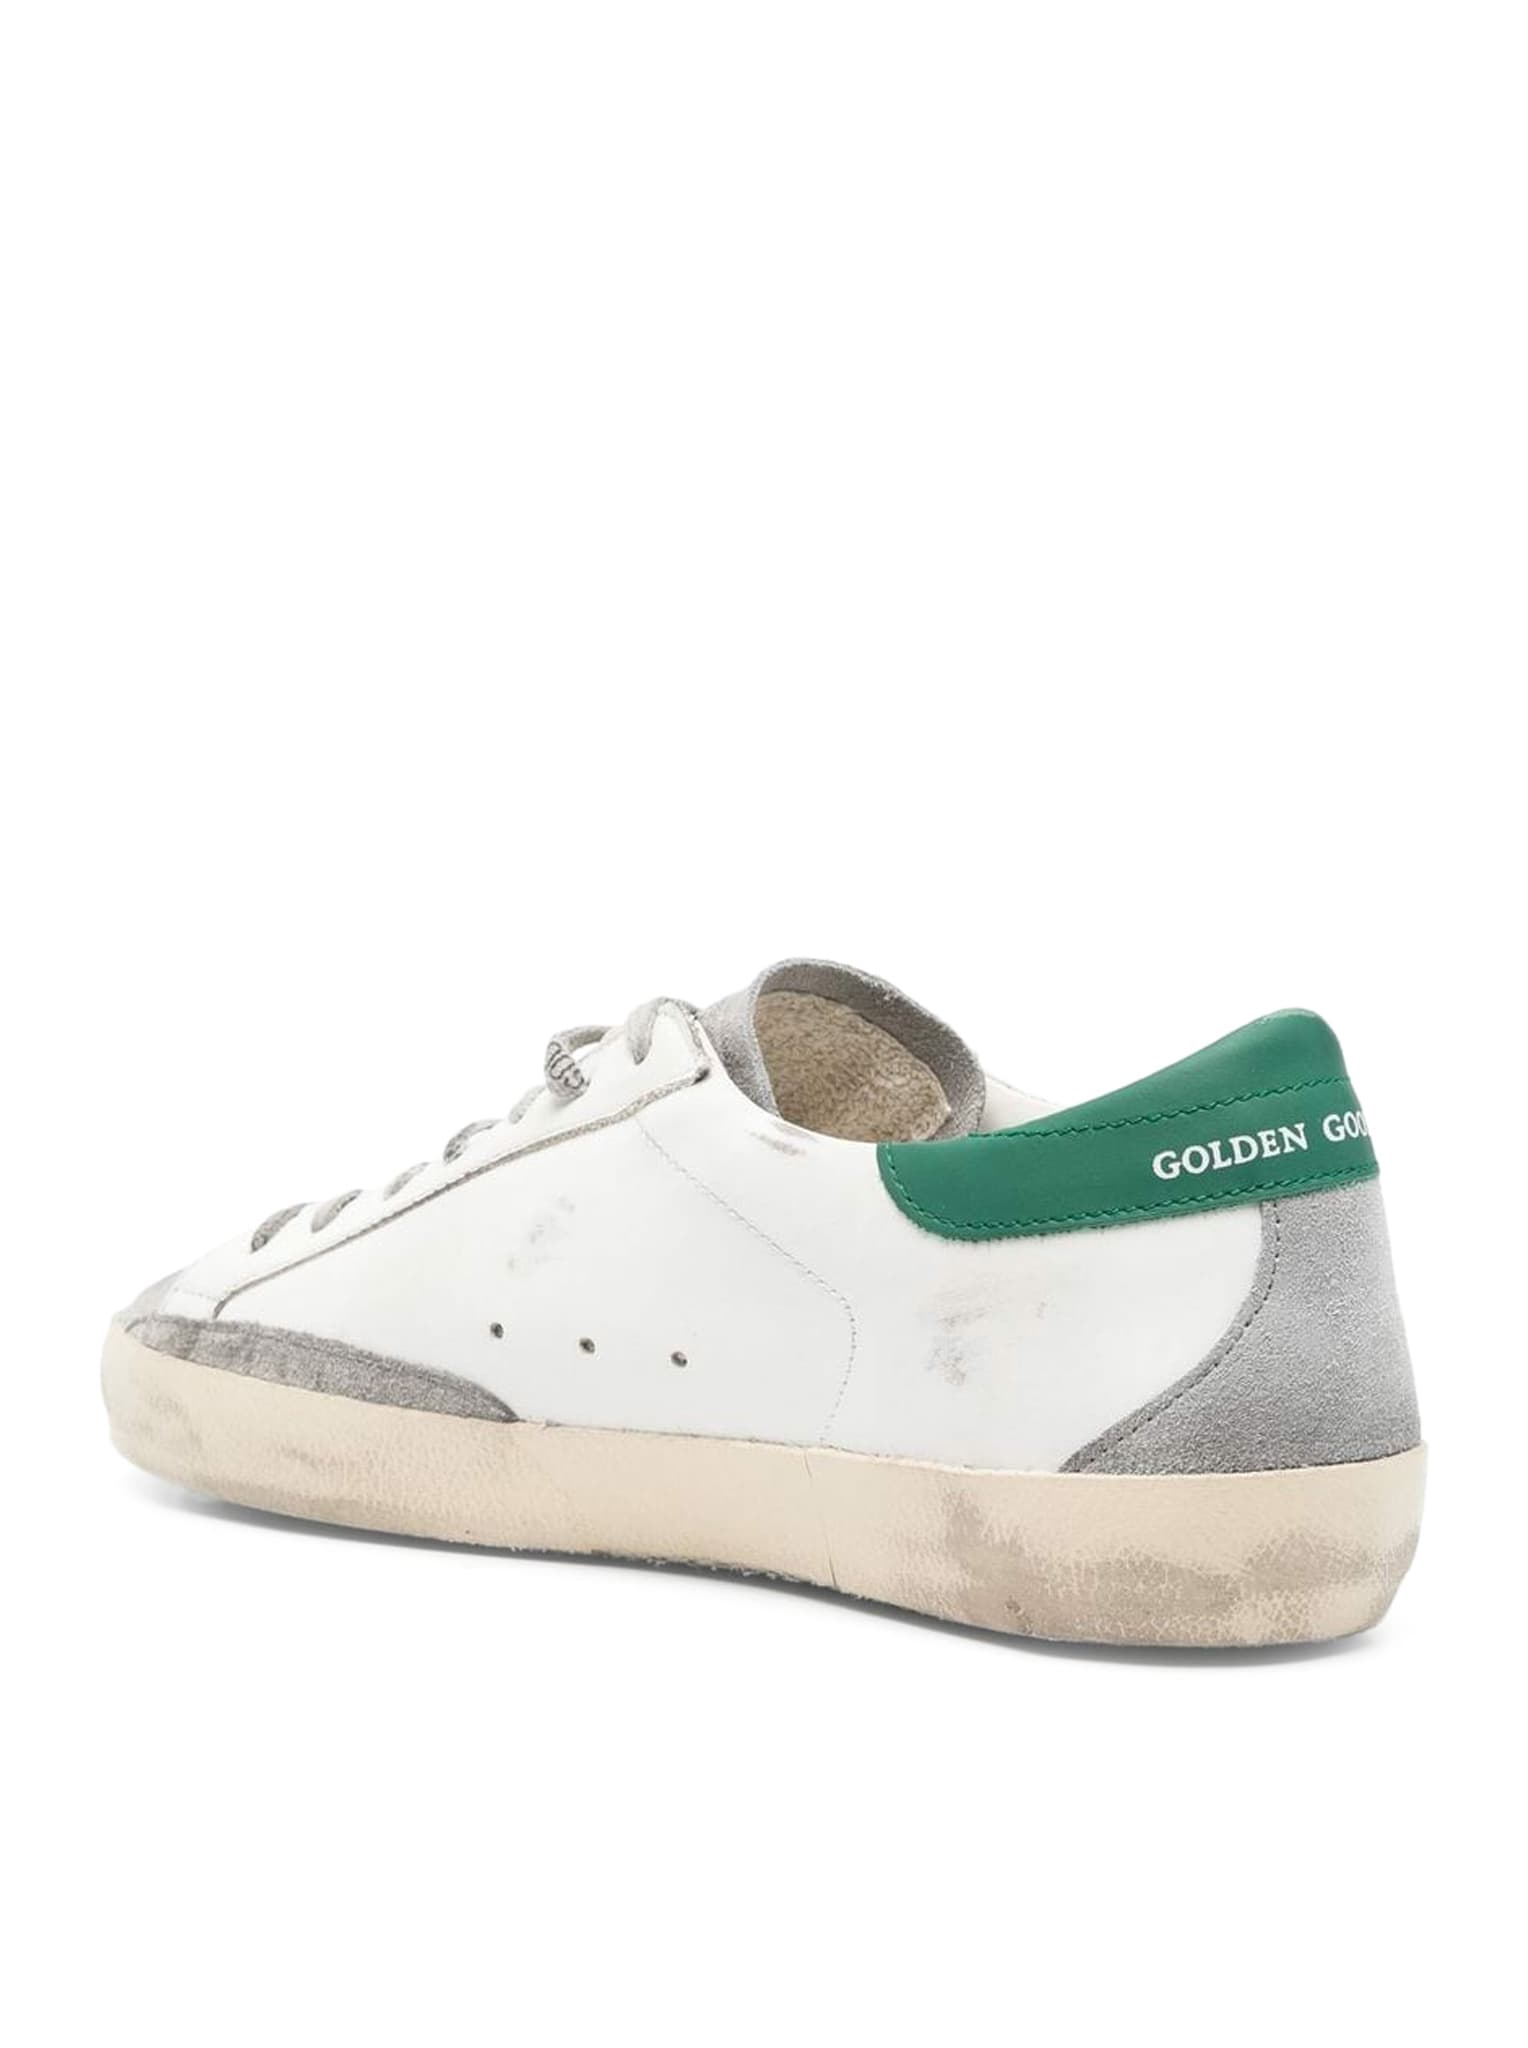 Shop Golden Goose Super-star Leather Upper And Heel Suede Toe And Spur Laminated Star Metal Lettering In White Grey Silver Green